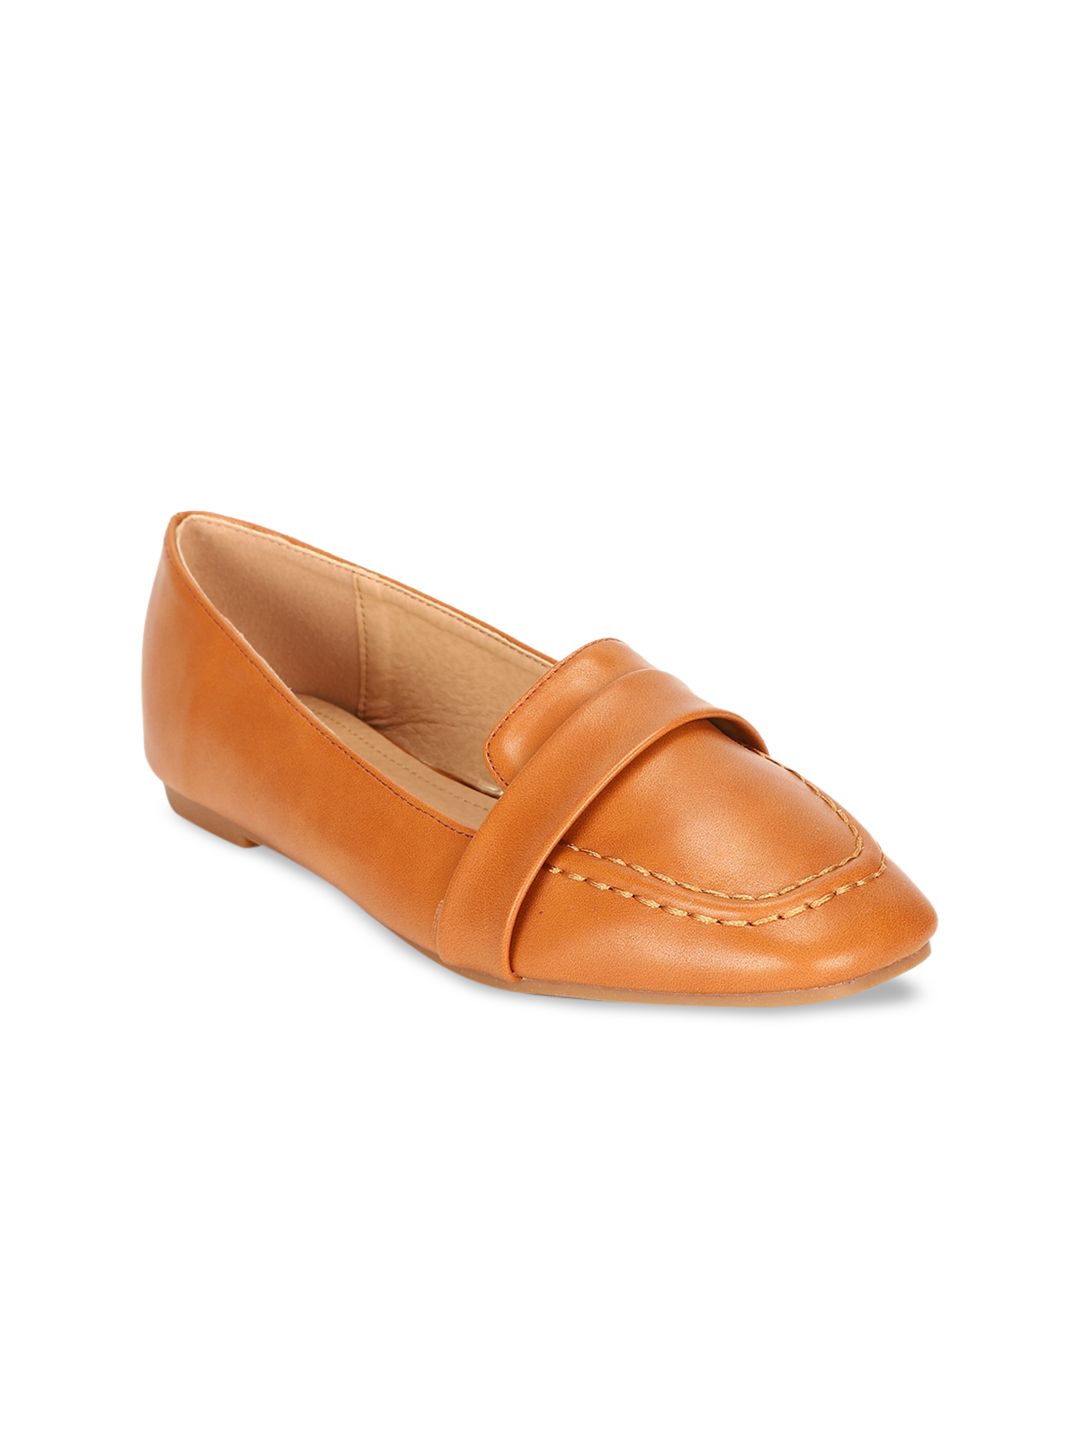 Allen Solly Woman Women Orange PU Loafers Price in India